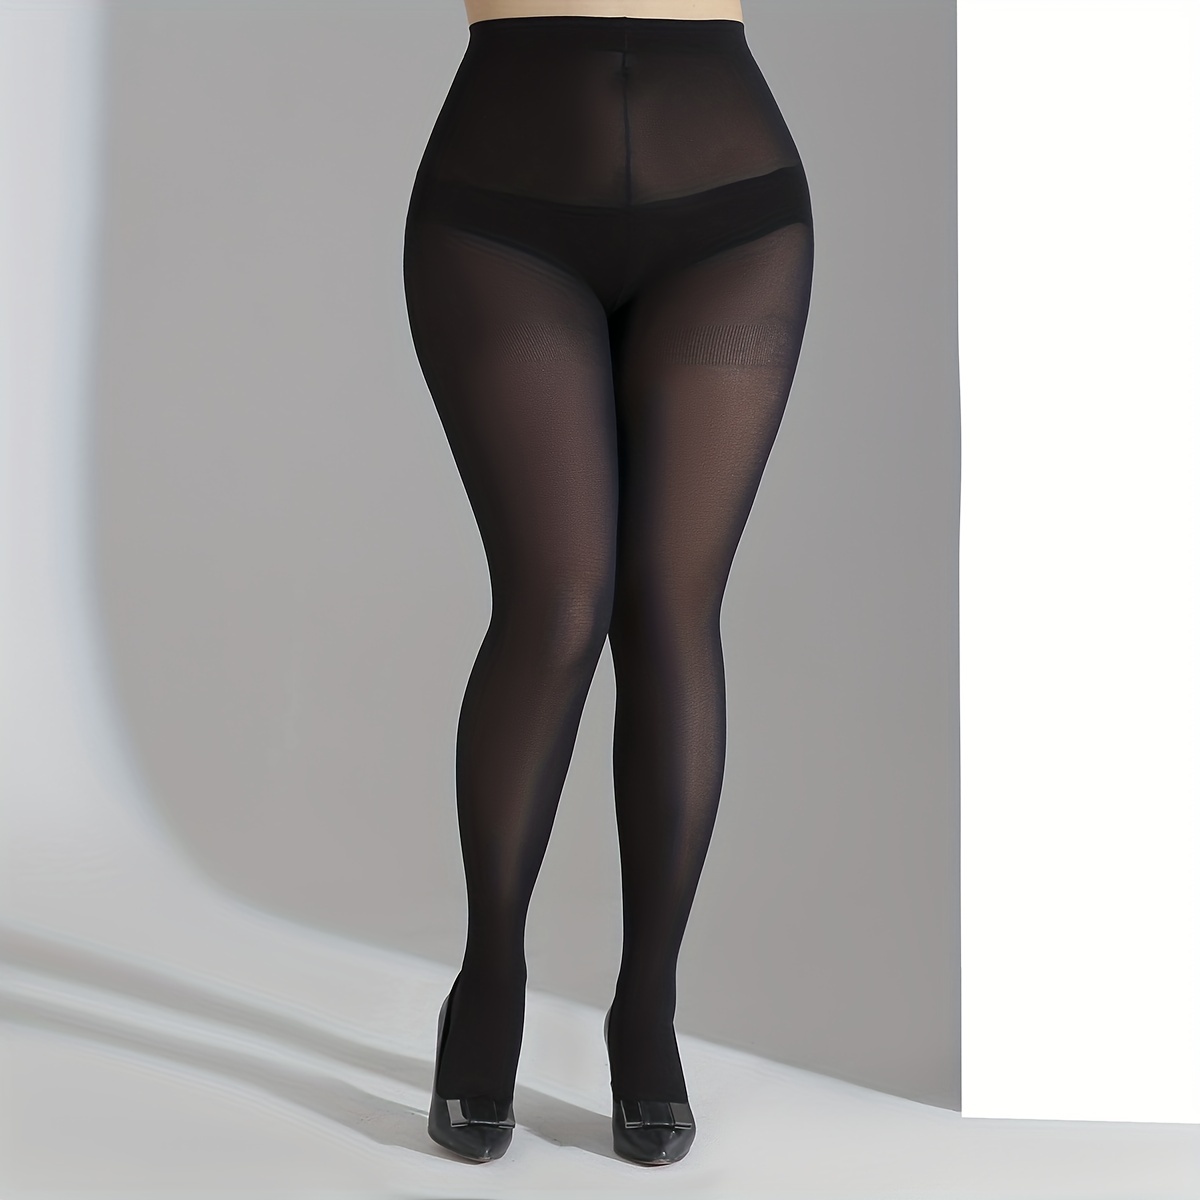 Super Elastic Magical Pantyhose Plus Size Tights Fall Pantyhose Transparent  Elastic Sexy Tights Warm, Stockings Tights, Pantyhose Stockings, Sheer  Tights, पेंटीहोज़ - My Online Collection Store, Bengaluru